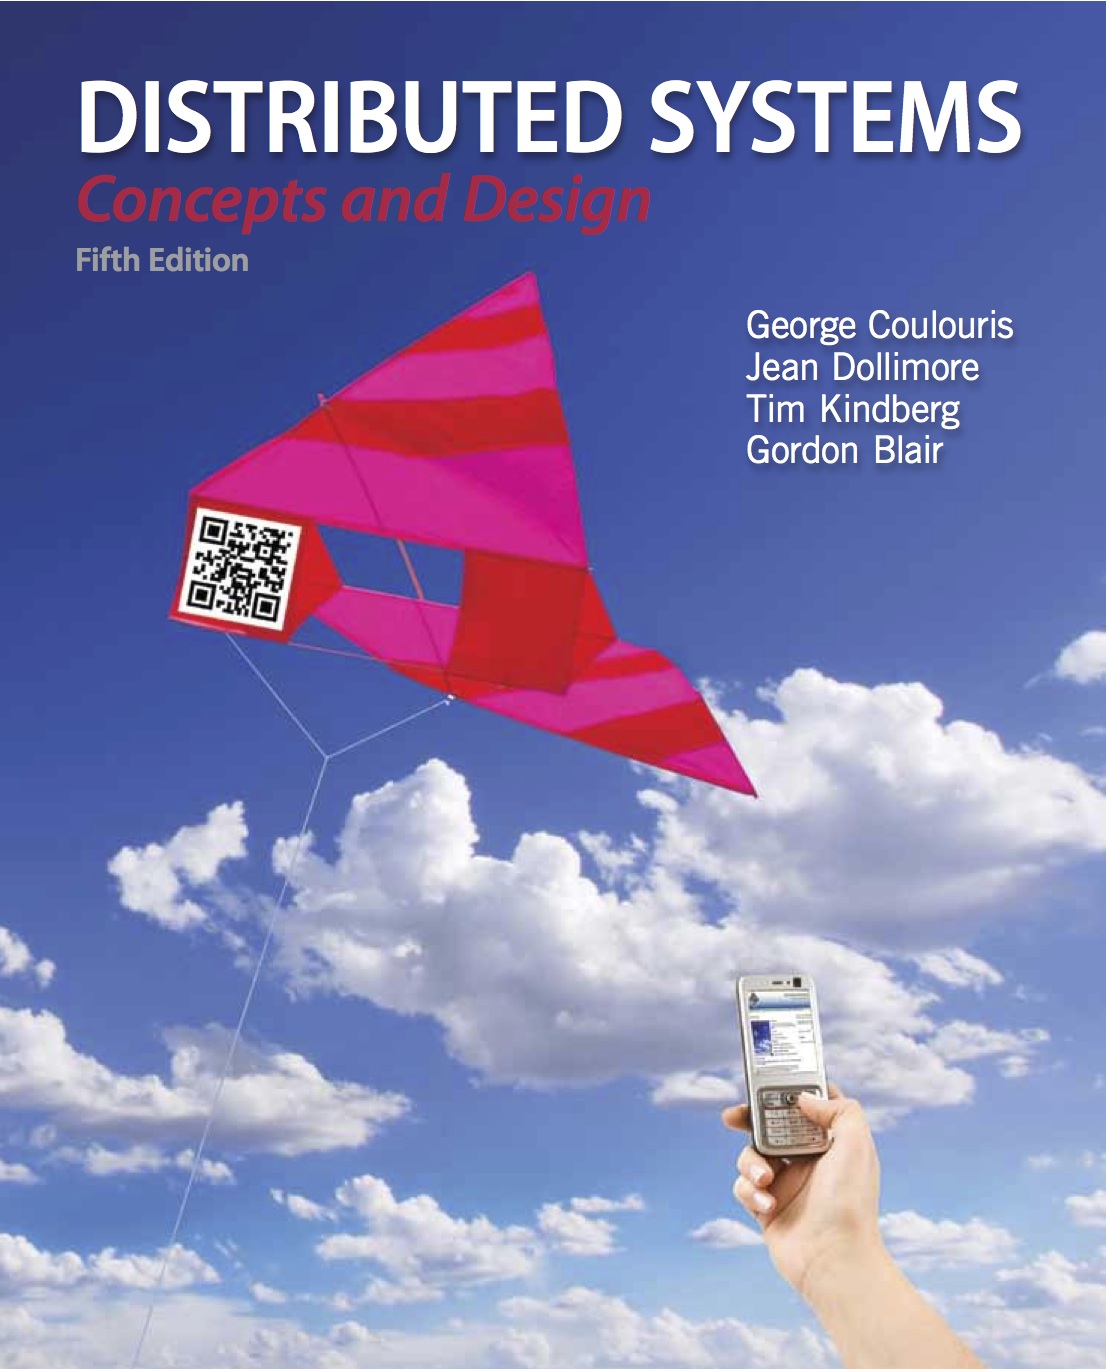 Distributed Systems Concepts and Design, Fifth Edition